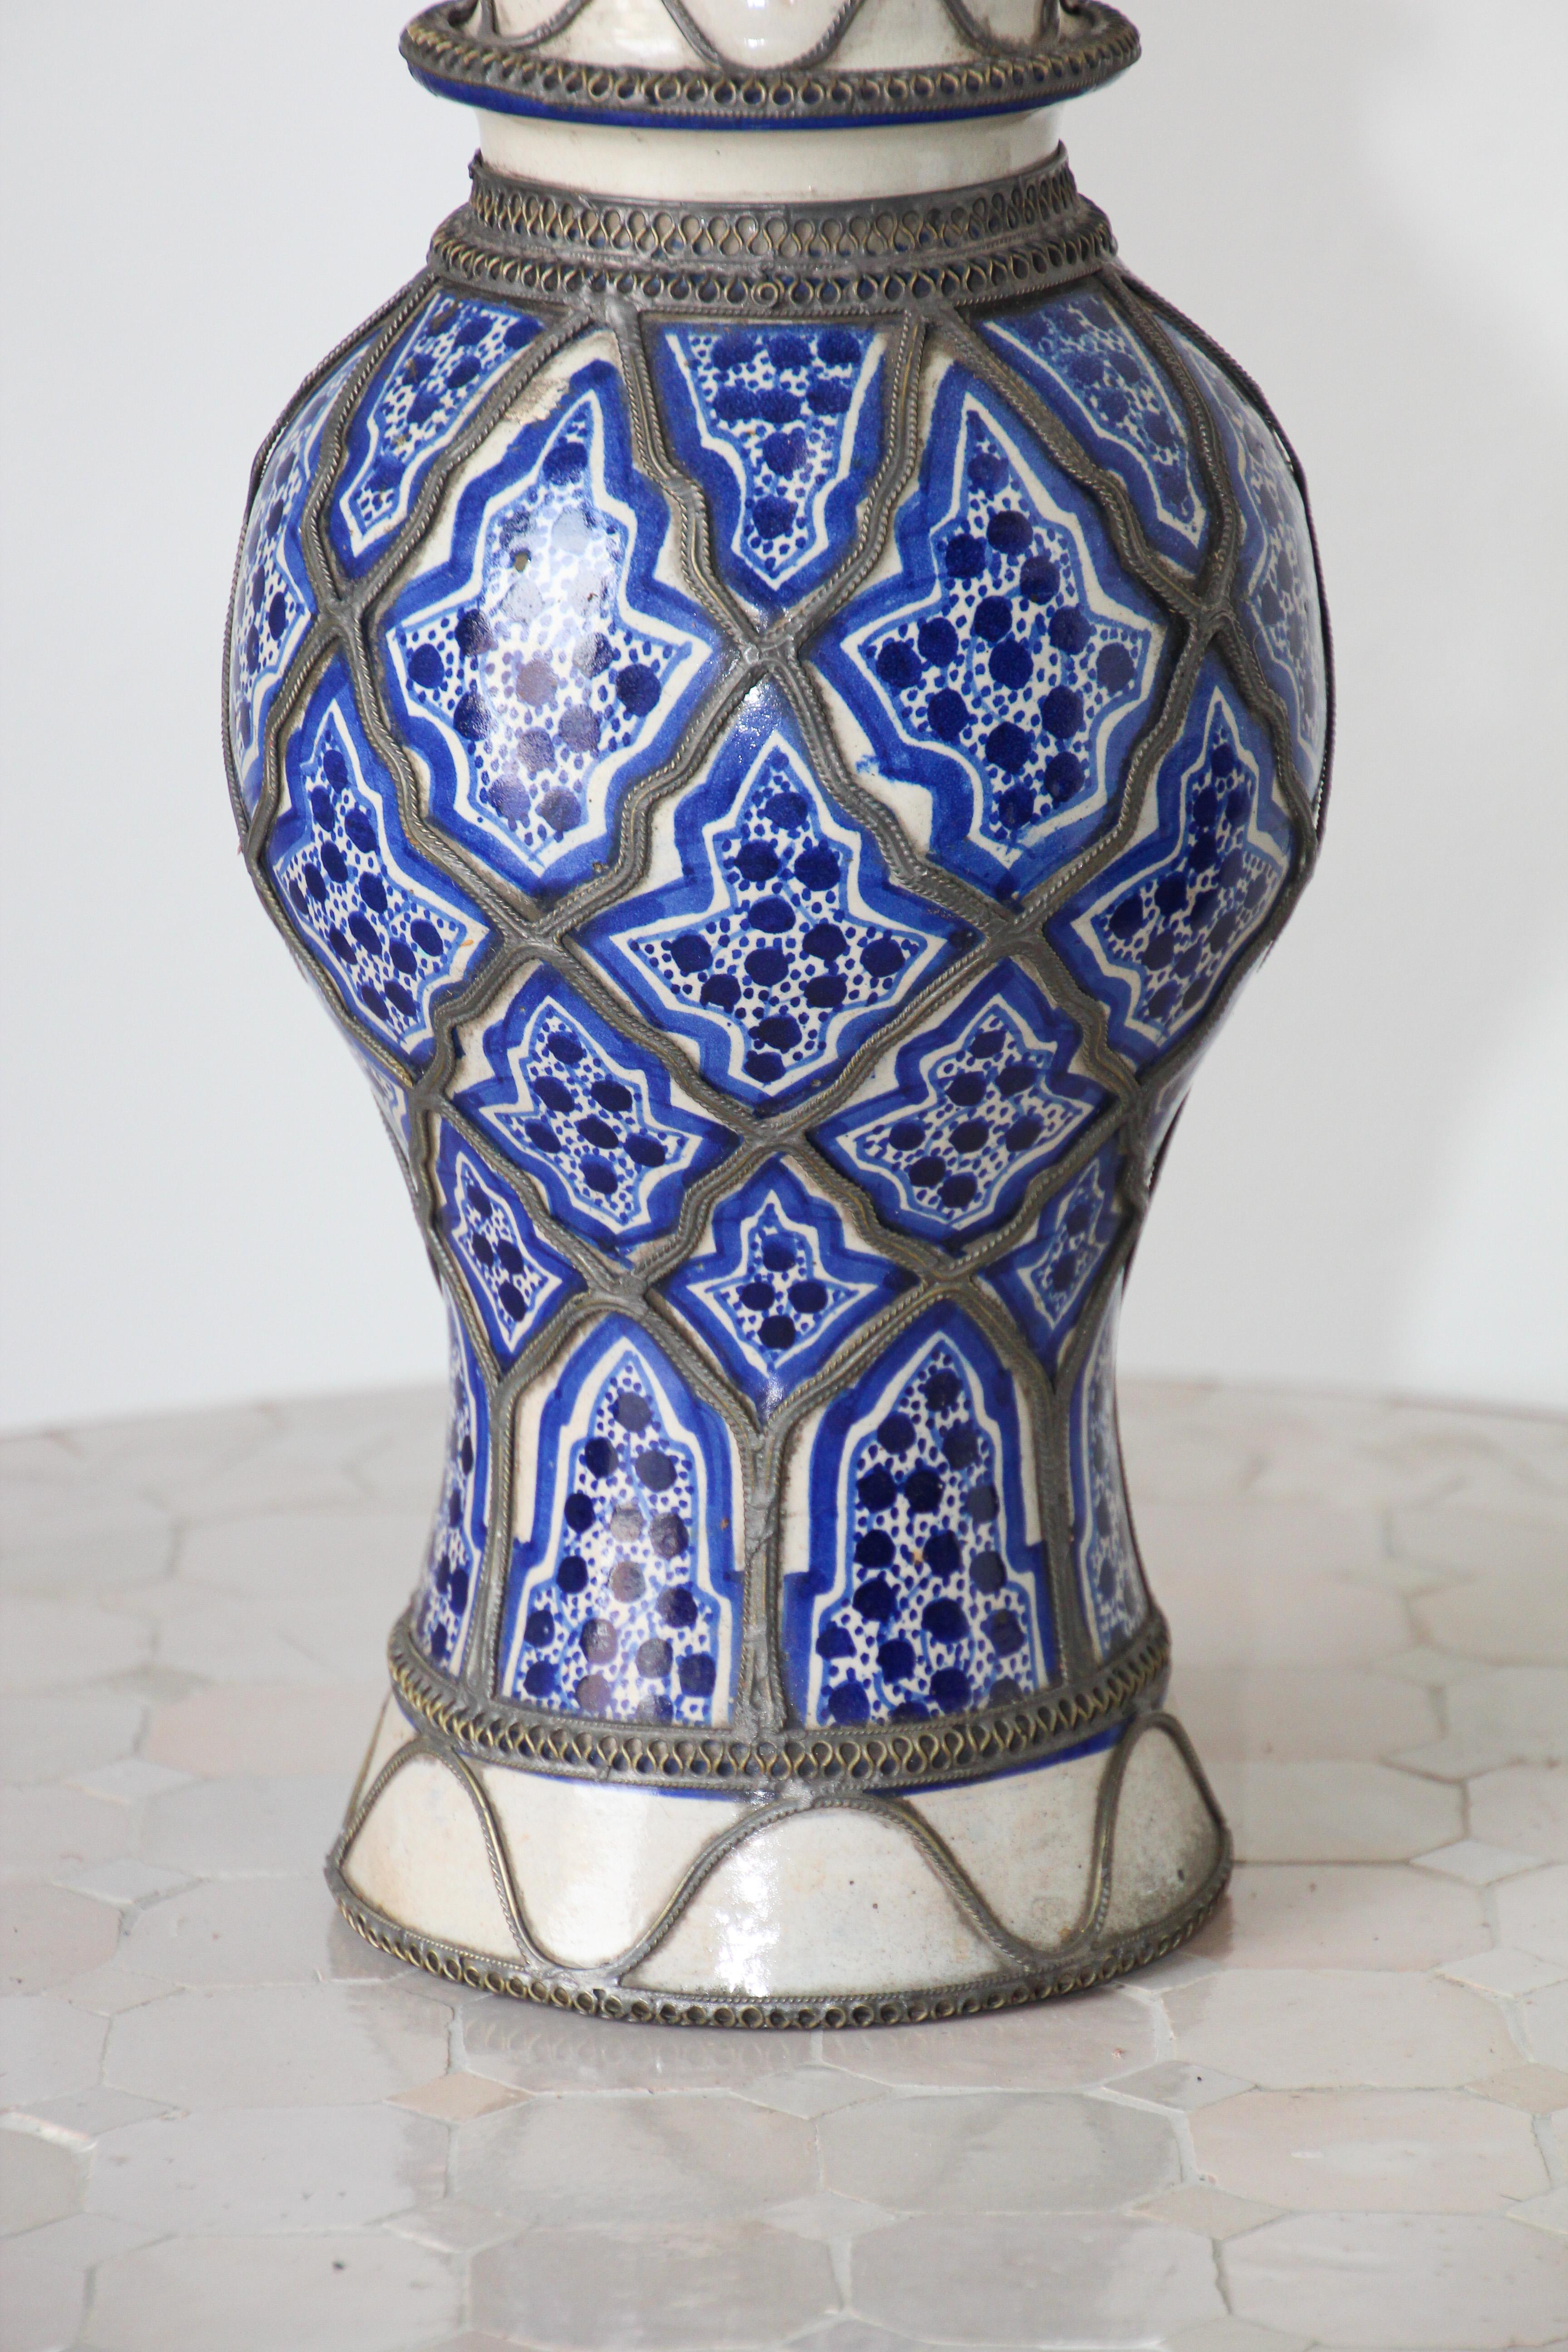 Antique Moroccan Ceramic Candlestick from Fez with Silver Filigree In Good Condition For Sale In North Hollywood, CA